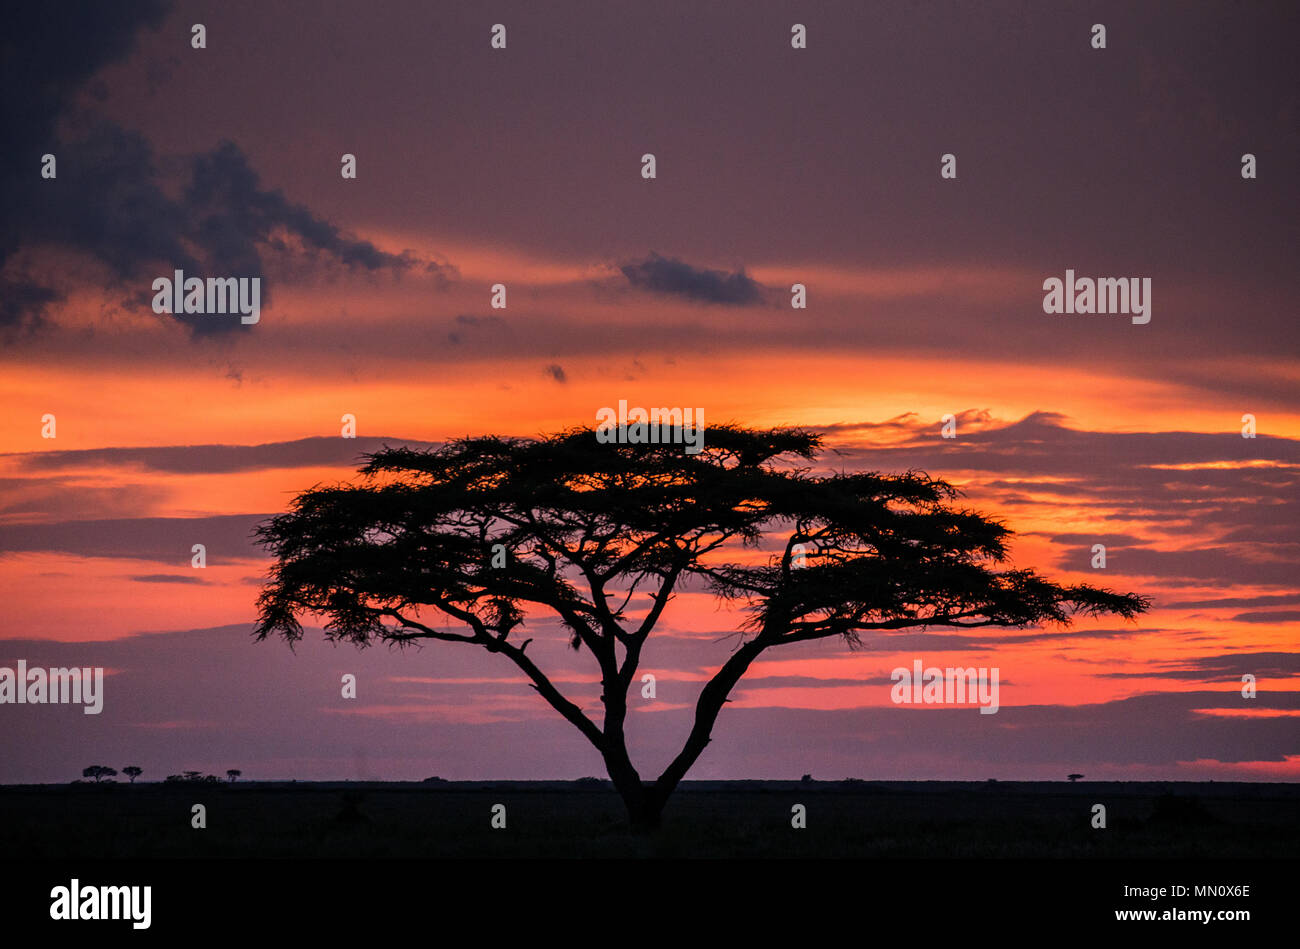 Solitary tree in the savanna against a background of a stunning sunset. Classic African sunset. Dawn. East Africa. Tanzania. Serengeti National Park. Stock Photo